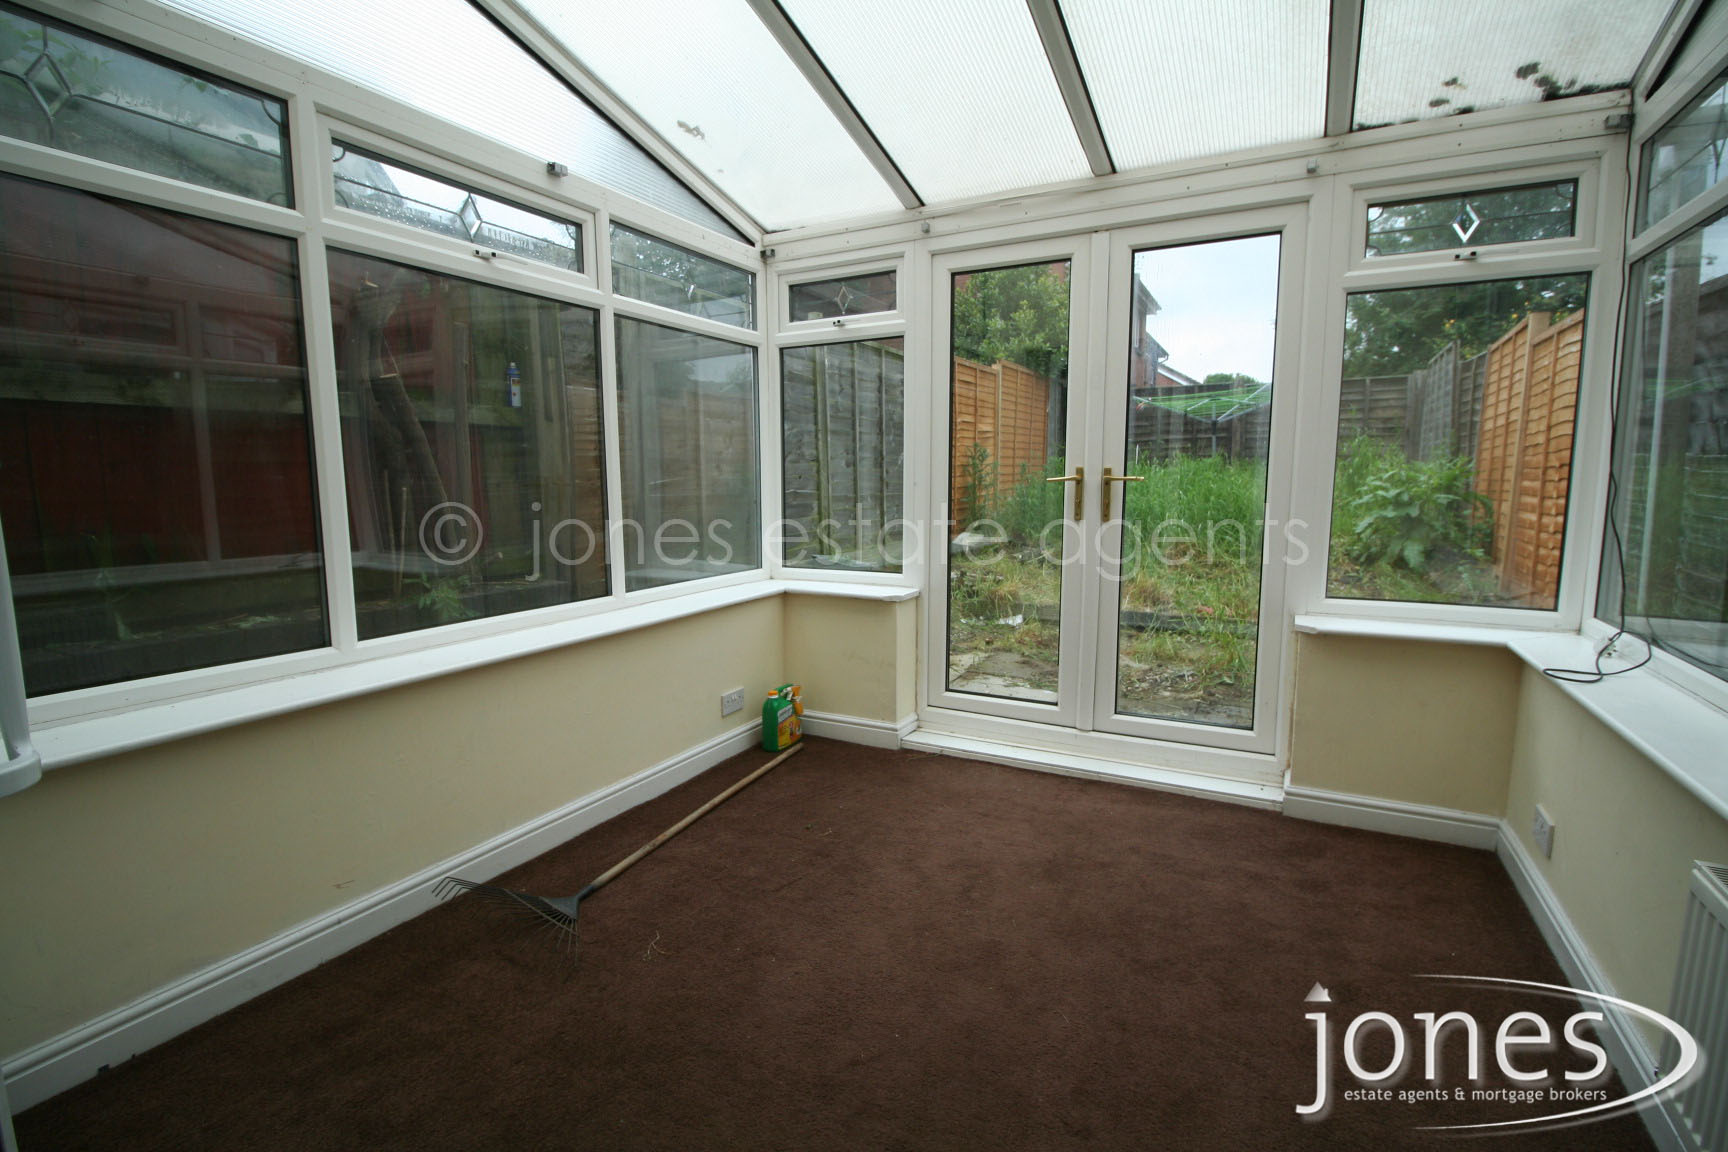 Home for Sale Let - Photo 03 Cuthbert Close, Thornaby, on Tees, TS17 6PJ